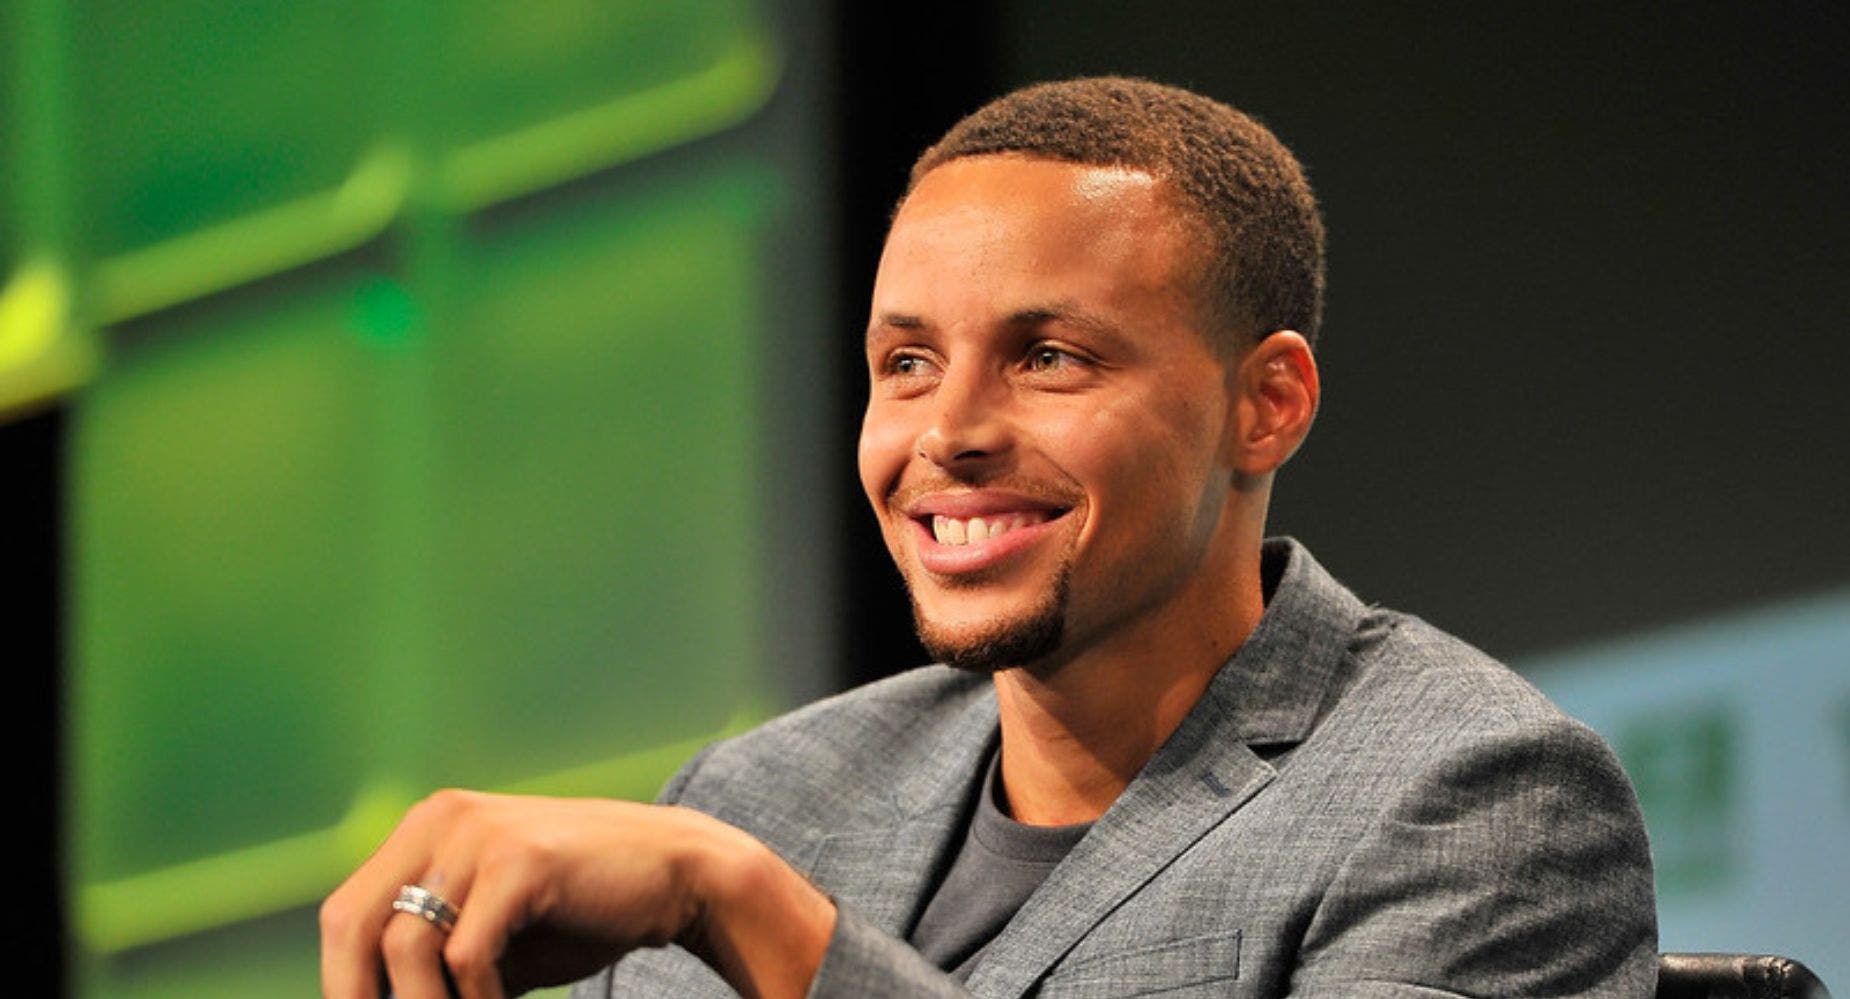 Move Over Metaverse, Curryverse Could Be Next From NBA Star Steph Curry: What It Means For Under Armour